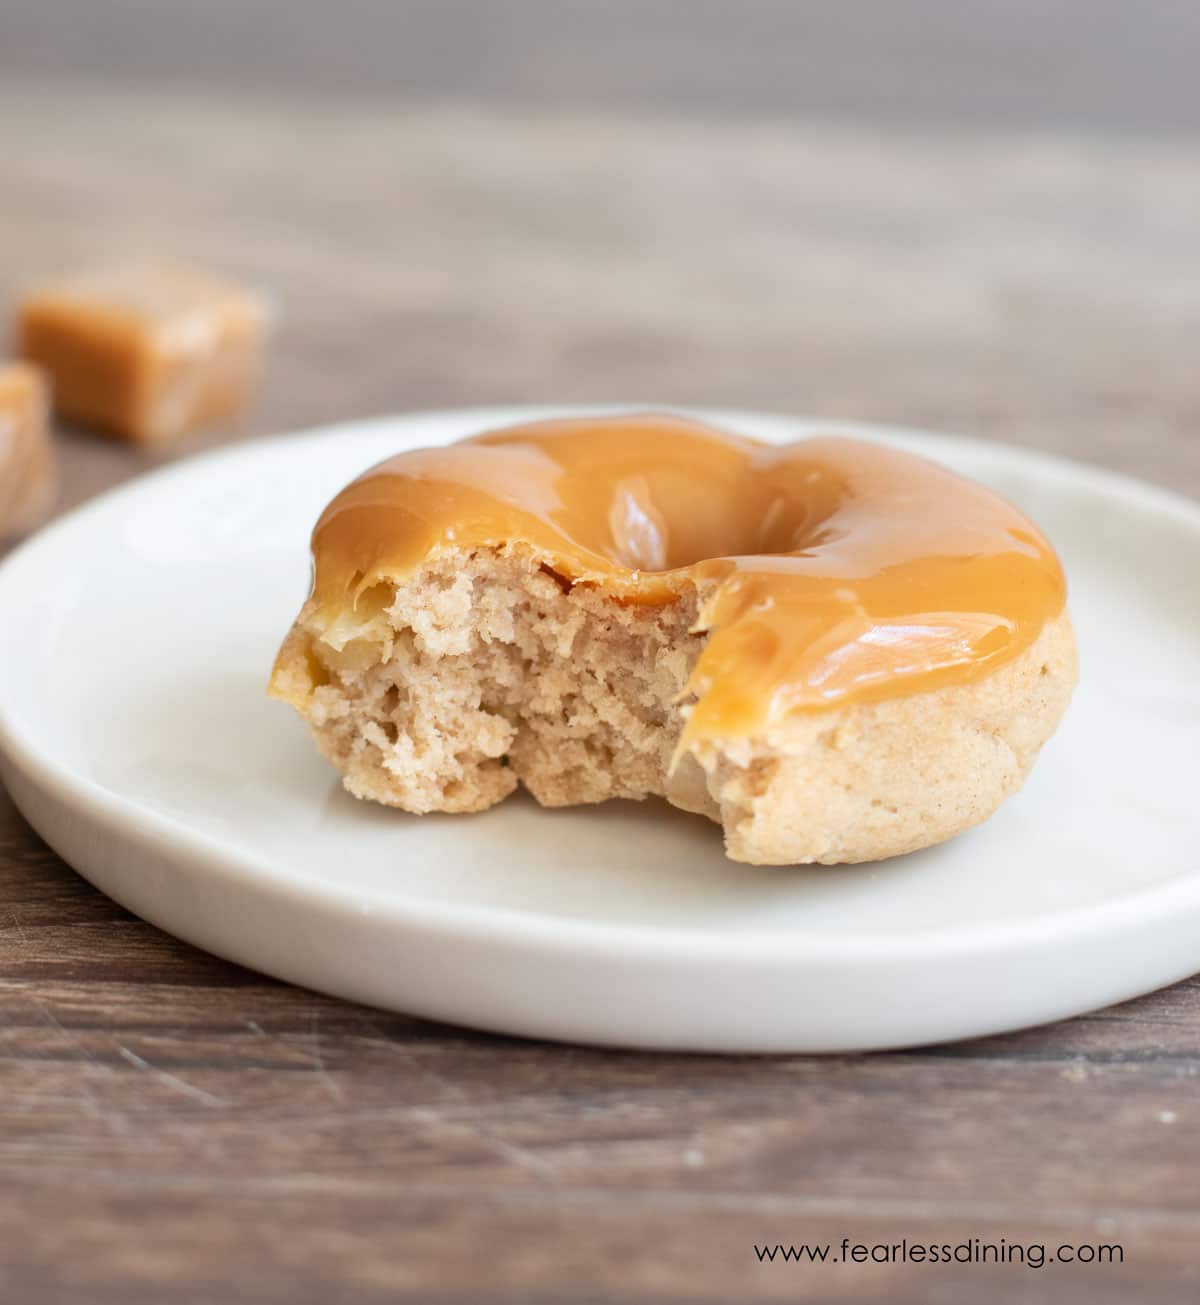 A caramel apple donut on a plate with a bite taken out.